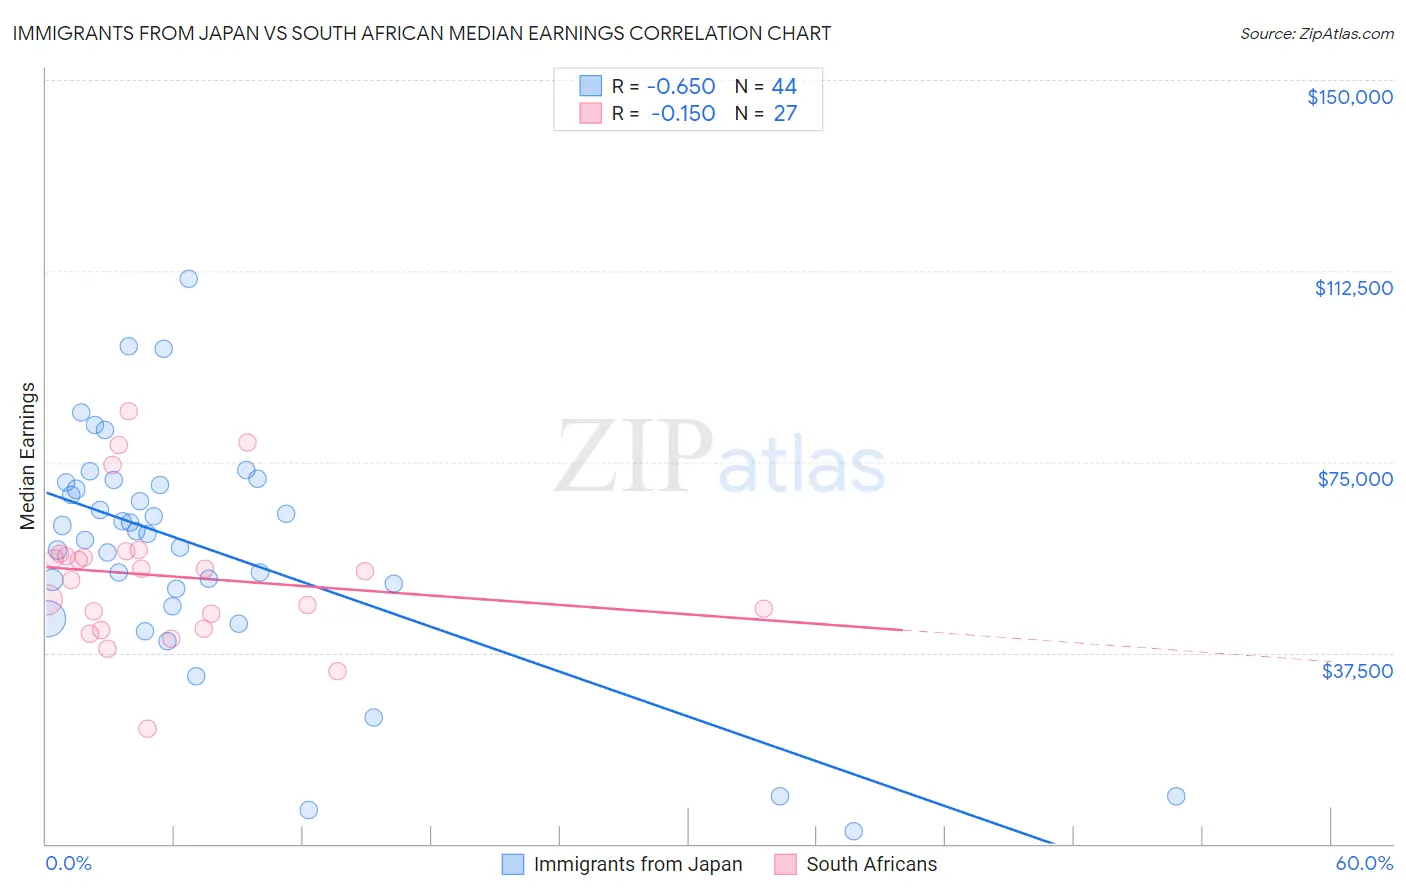 Immigrants from Japan vs South African Median Earnings